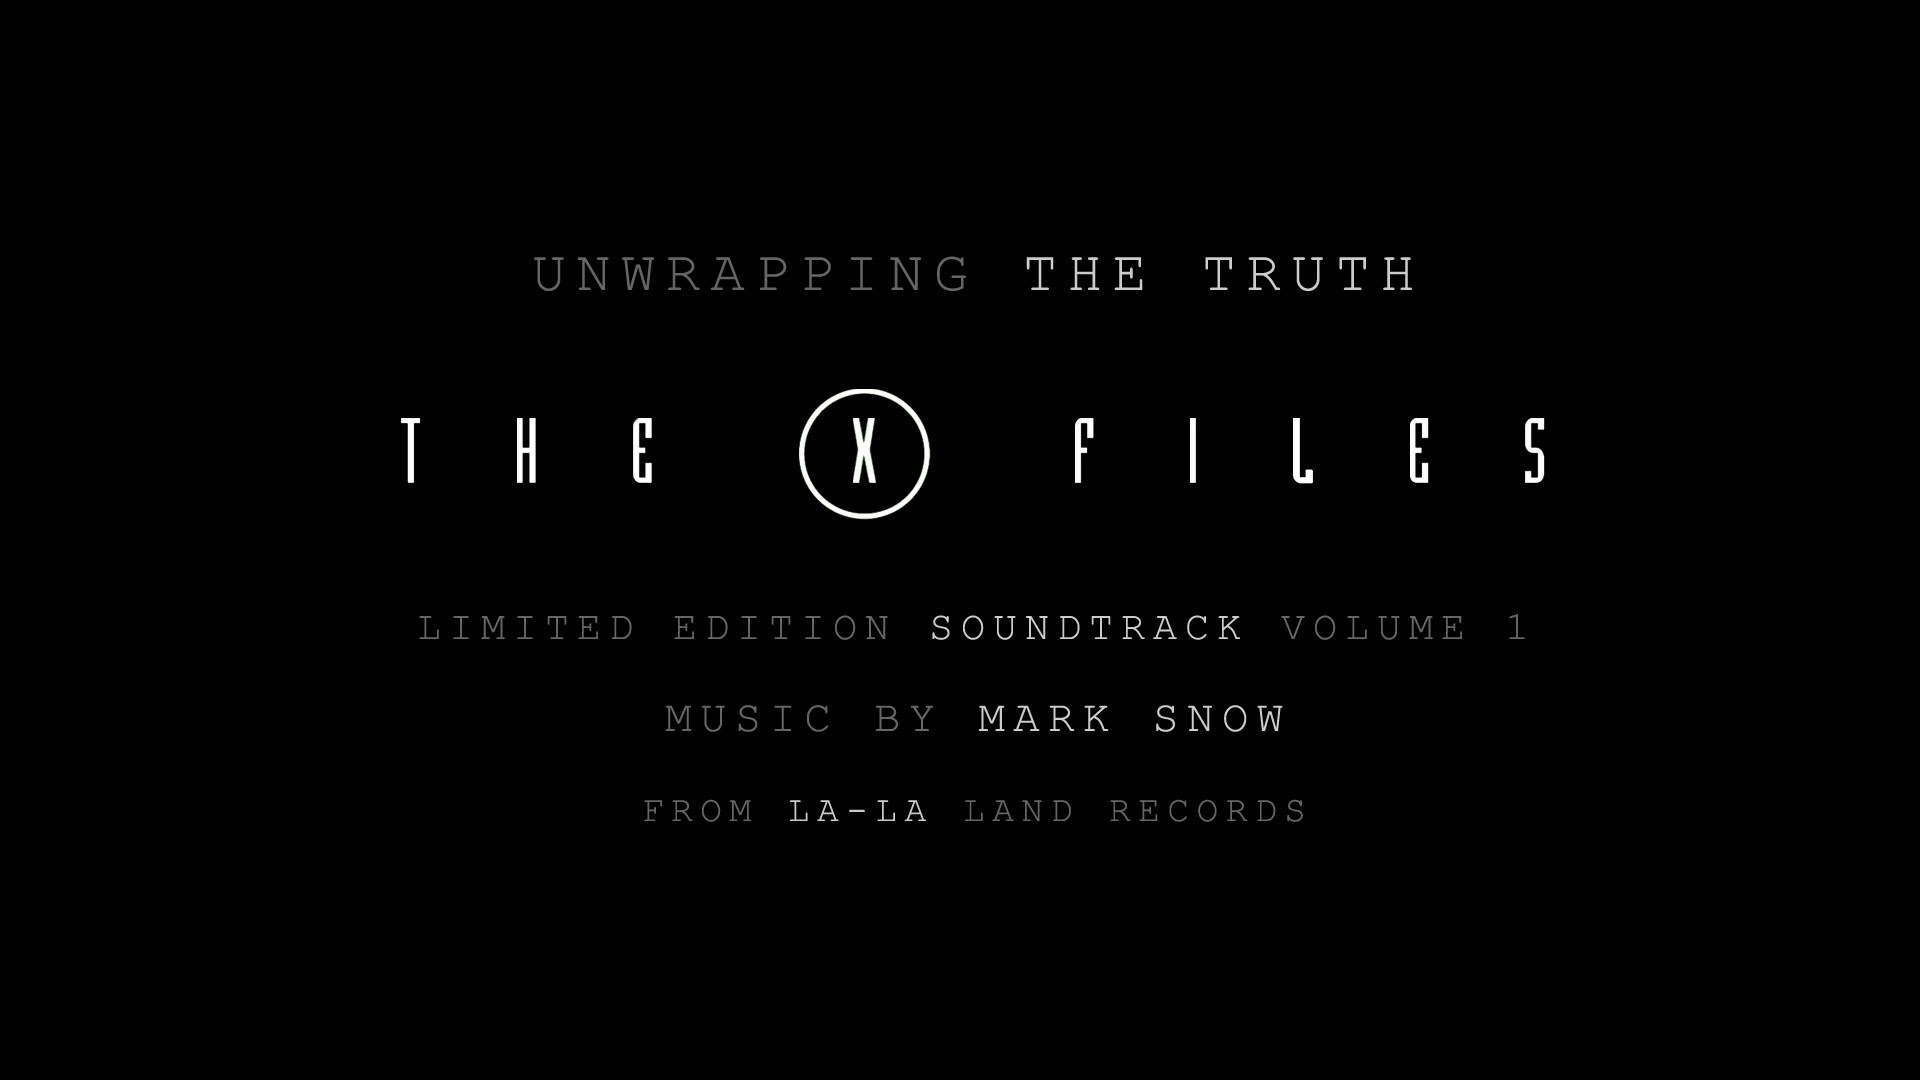 1920x1080 Unwrapping: X-Files Limited Edition Soundtrack by Mark Snow